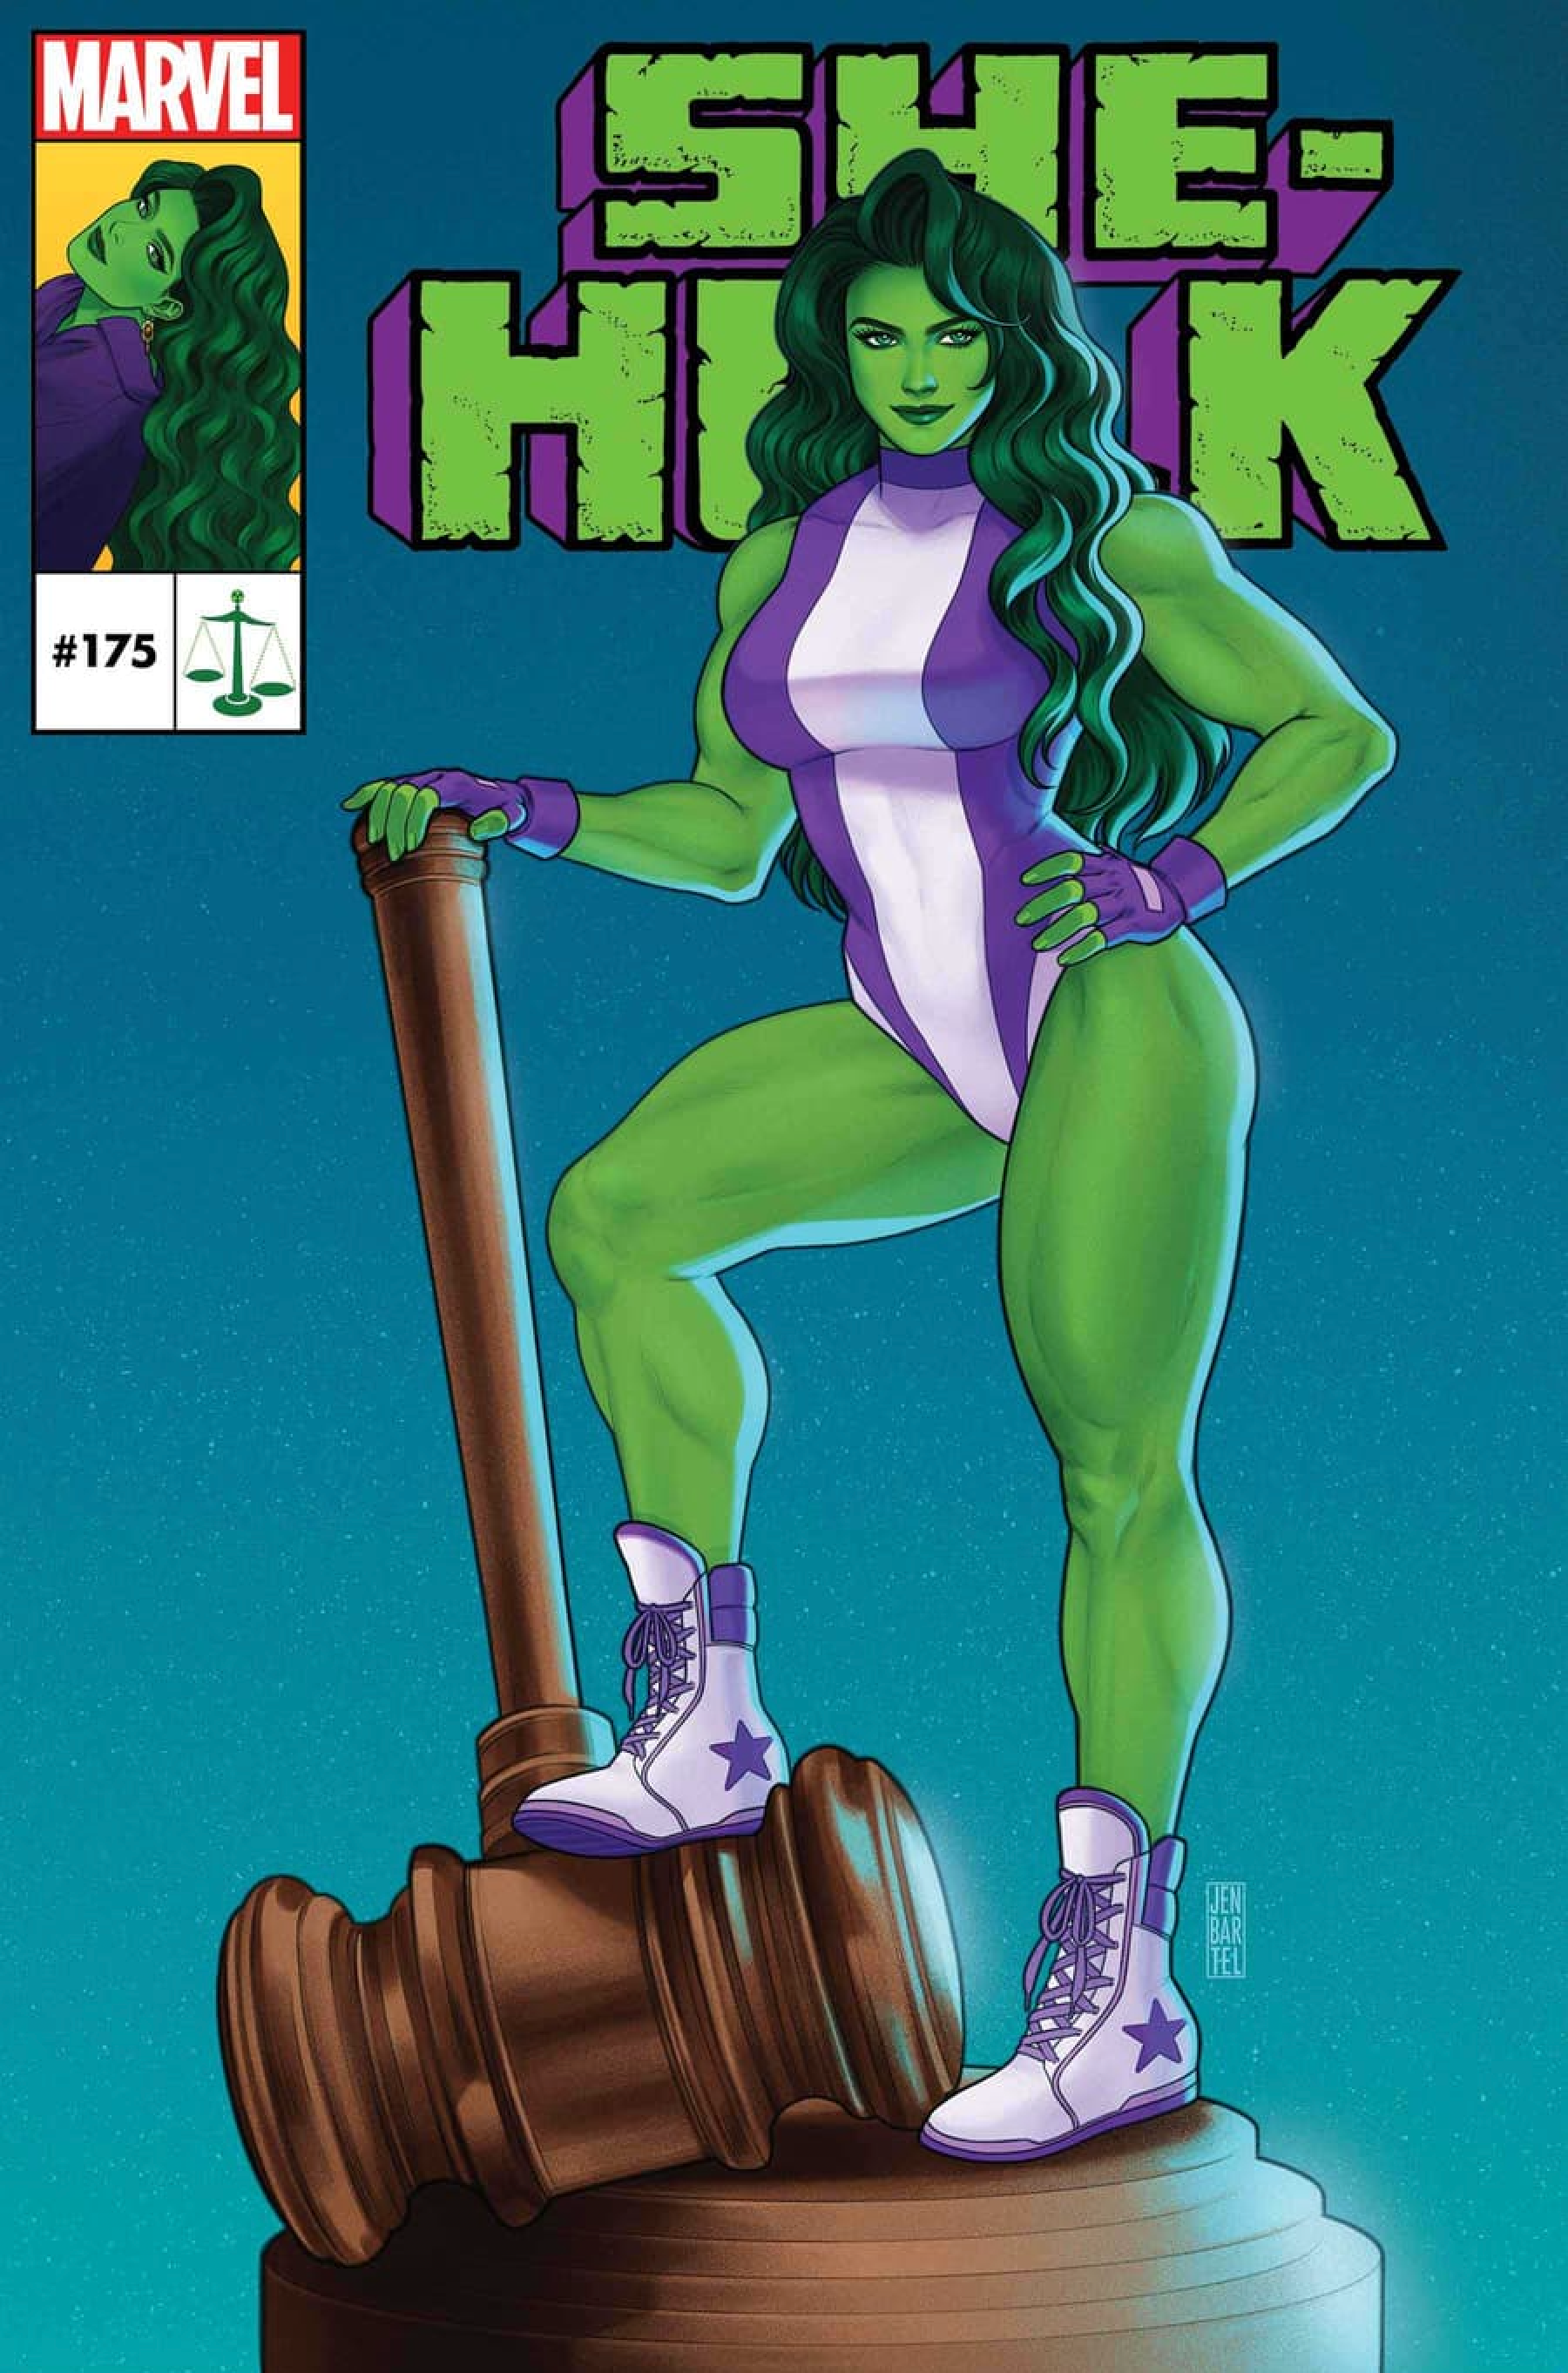 She-Hulk has a new cover and villain